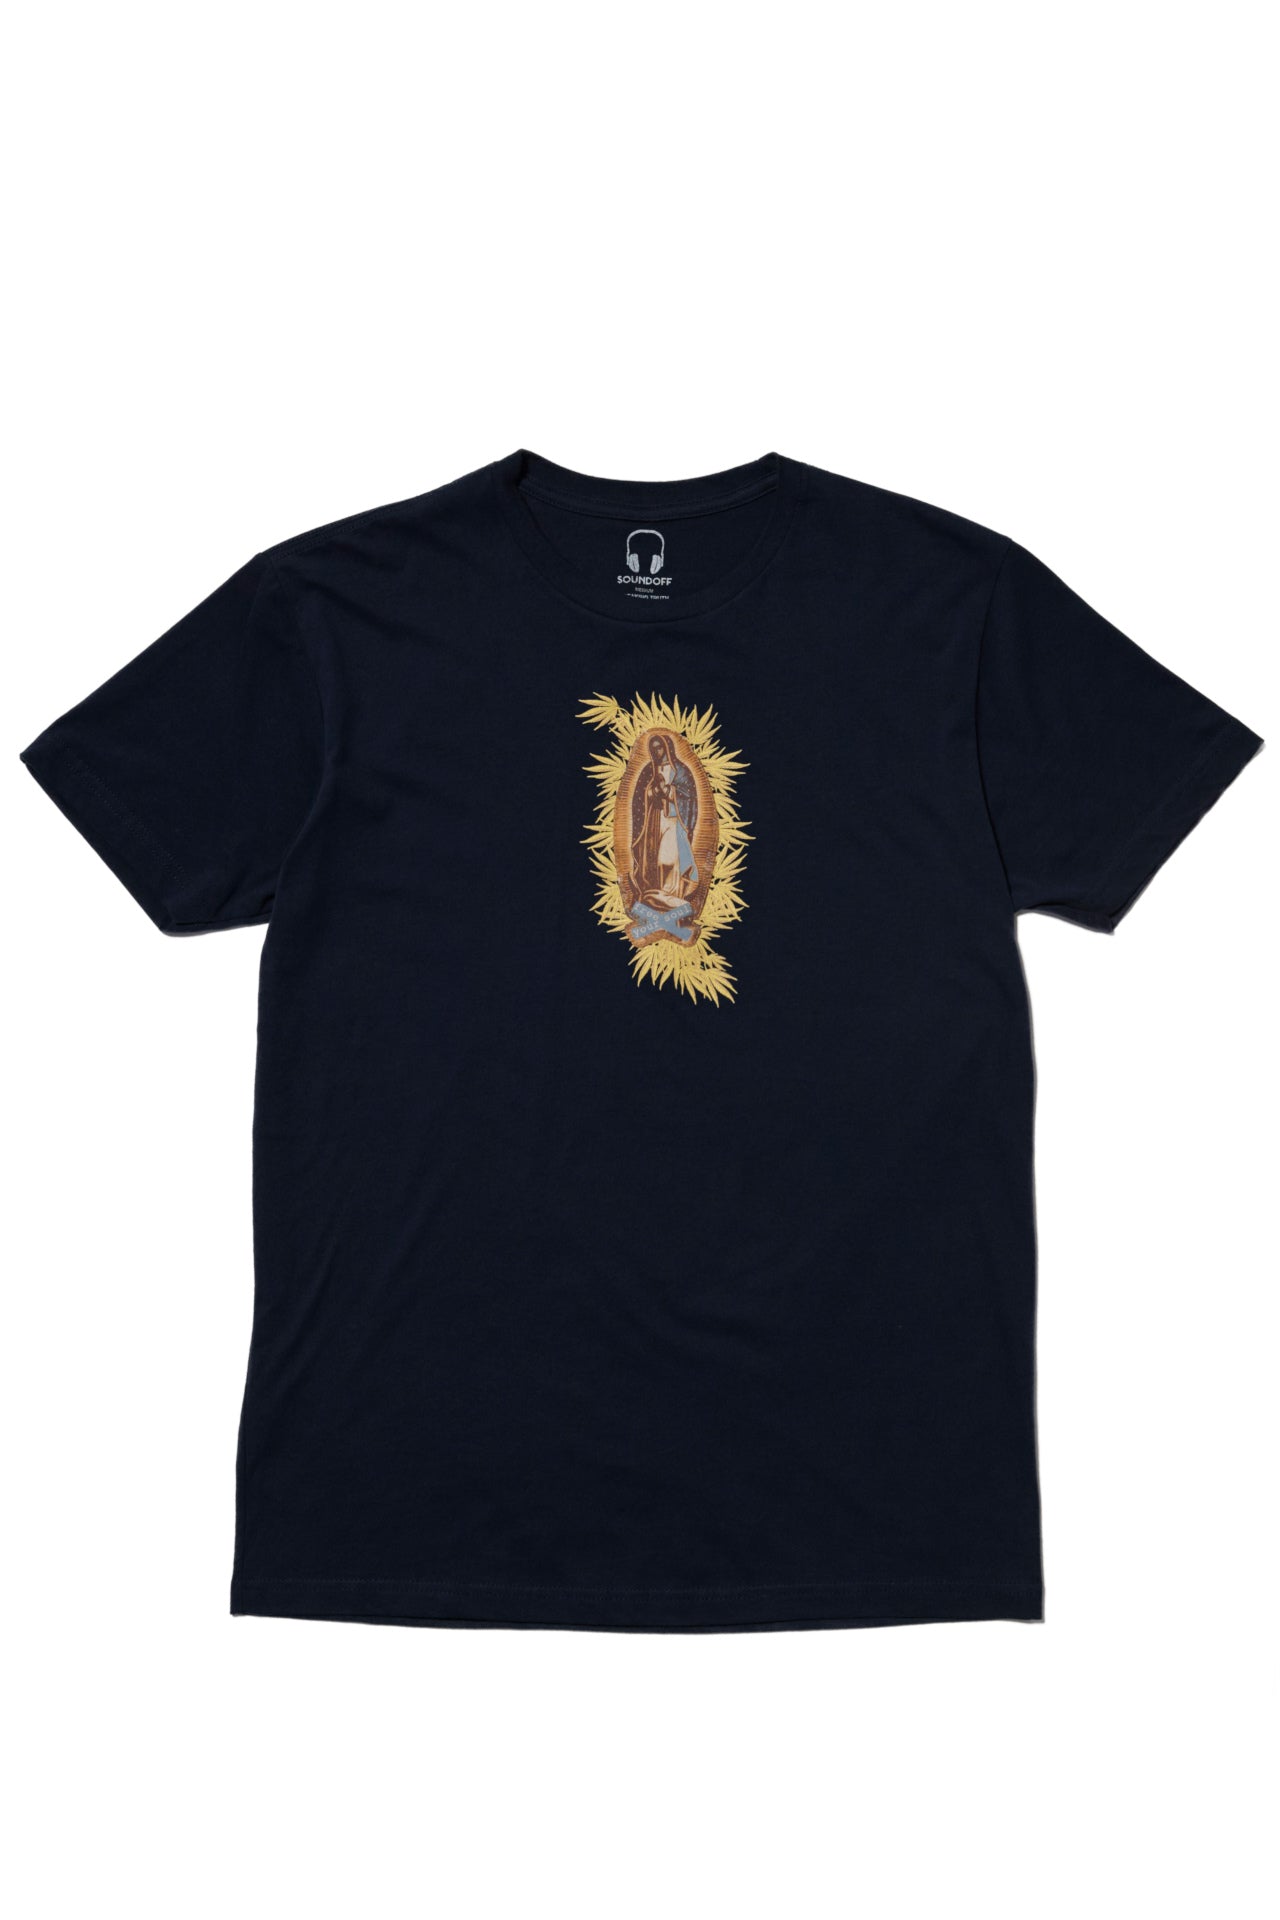 OUR LADY OF SOUL T-SHIRT